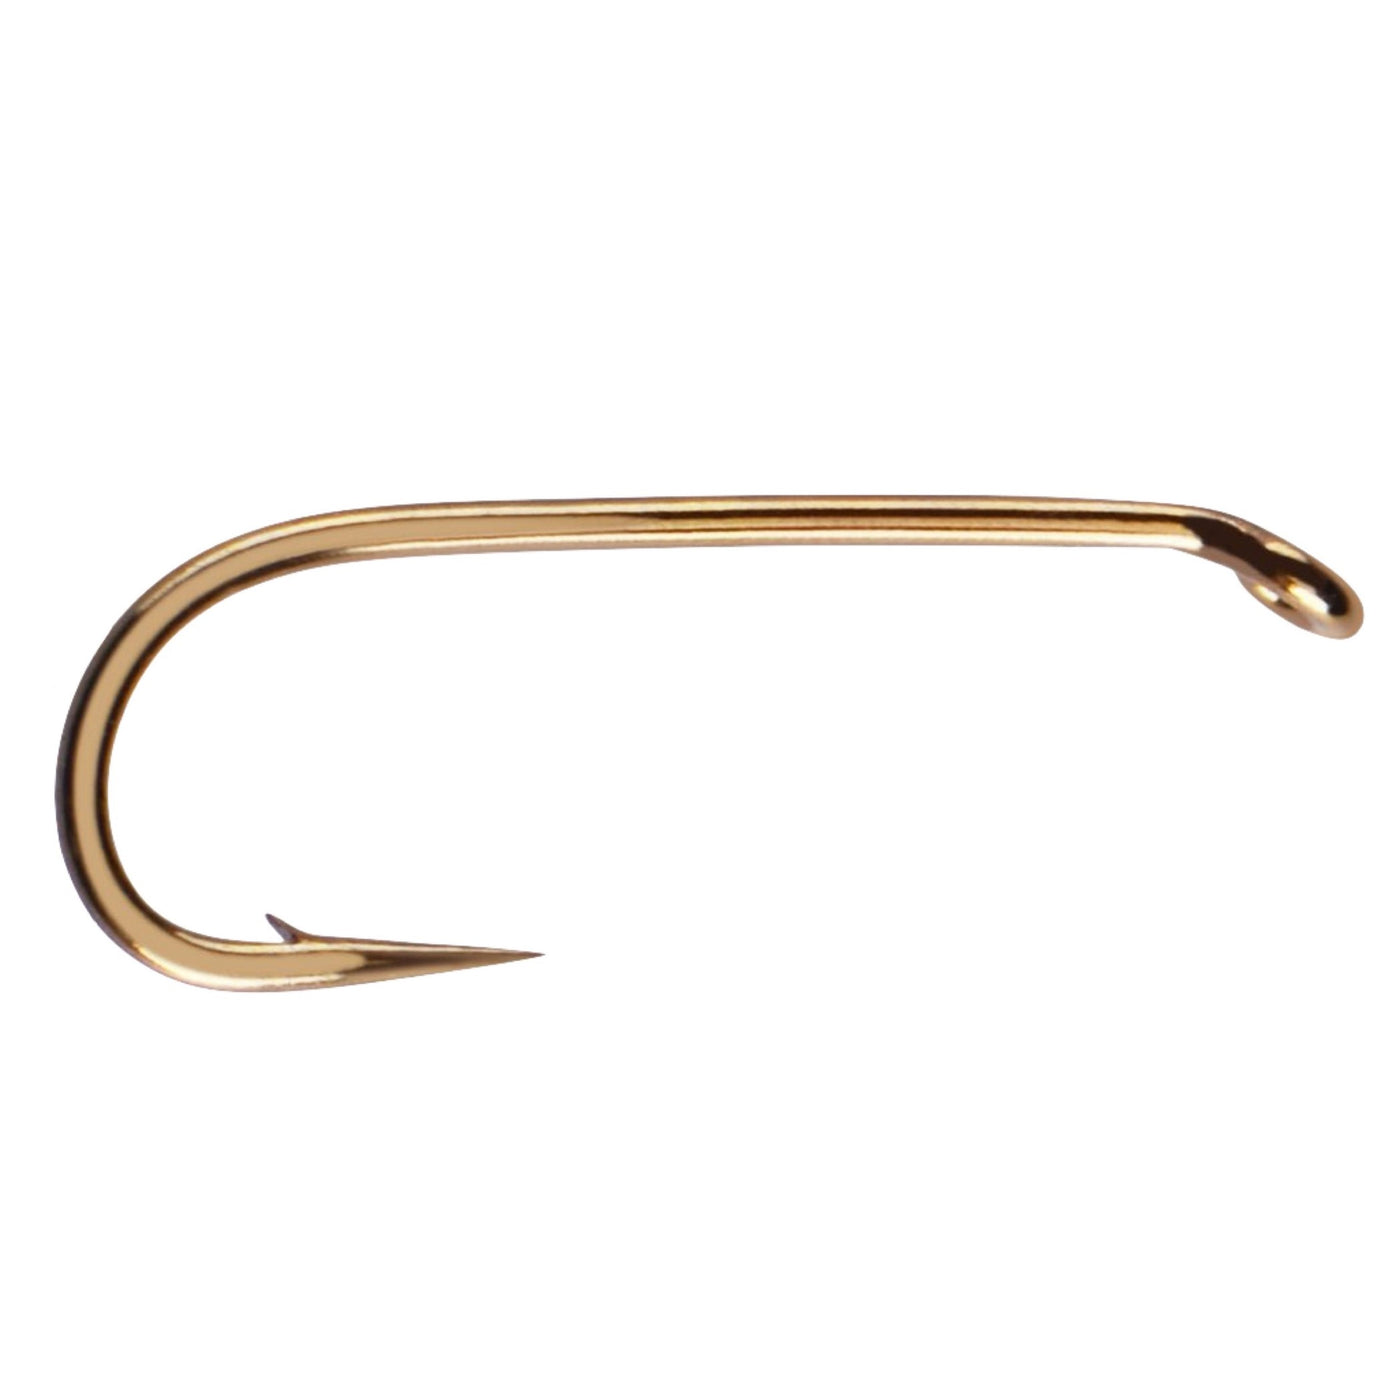 MUSTAD BRONZED 33340 BAIT HOOK-SIZE 10/0-100 COUNT-X STRONG-RINGED-FREE  SHIPPING